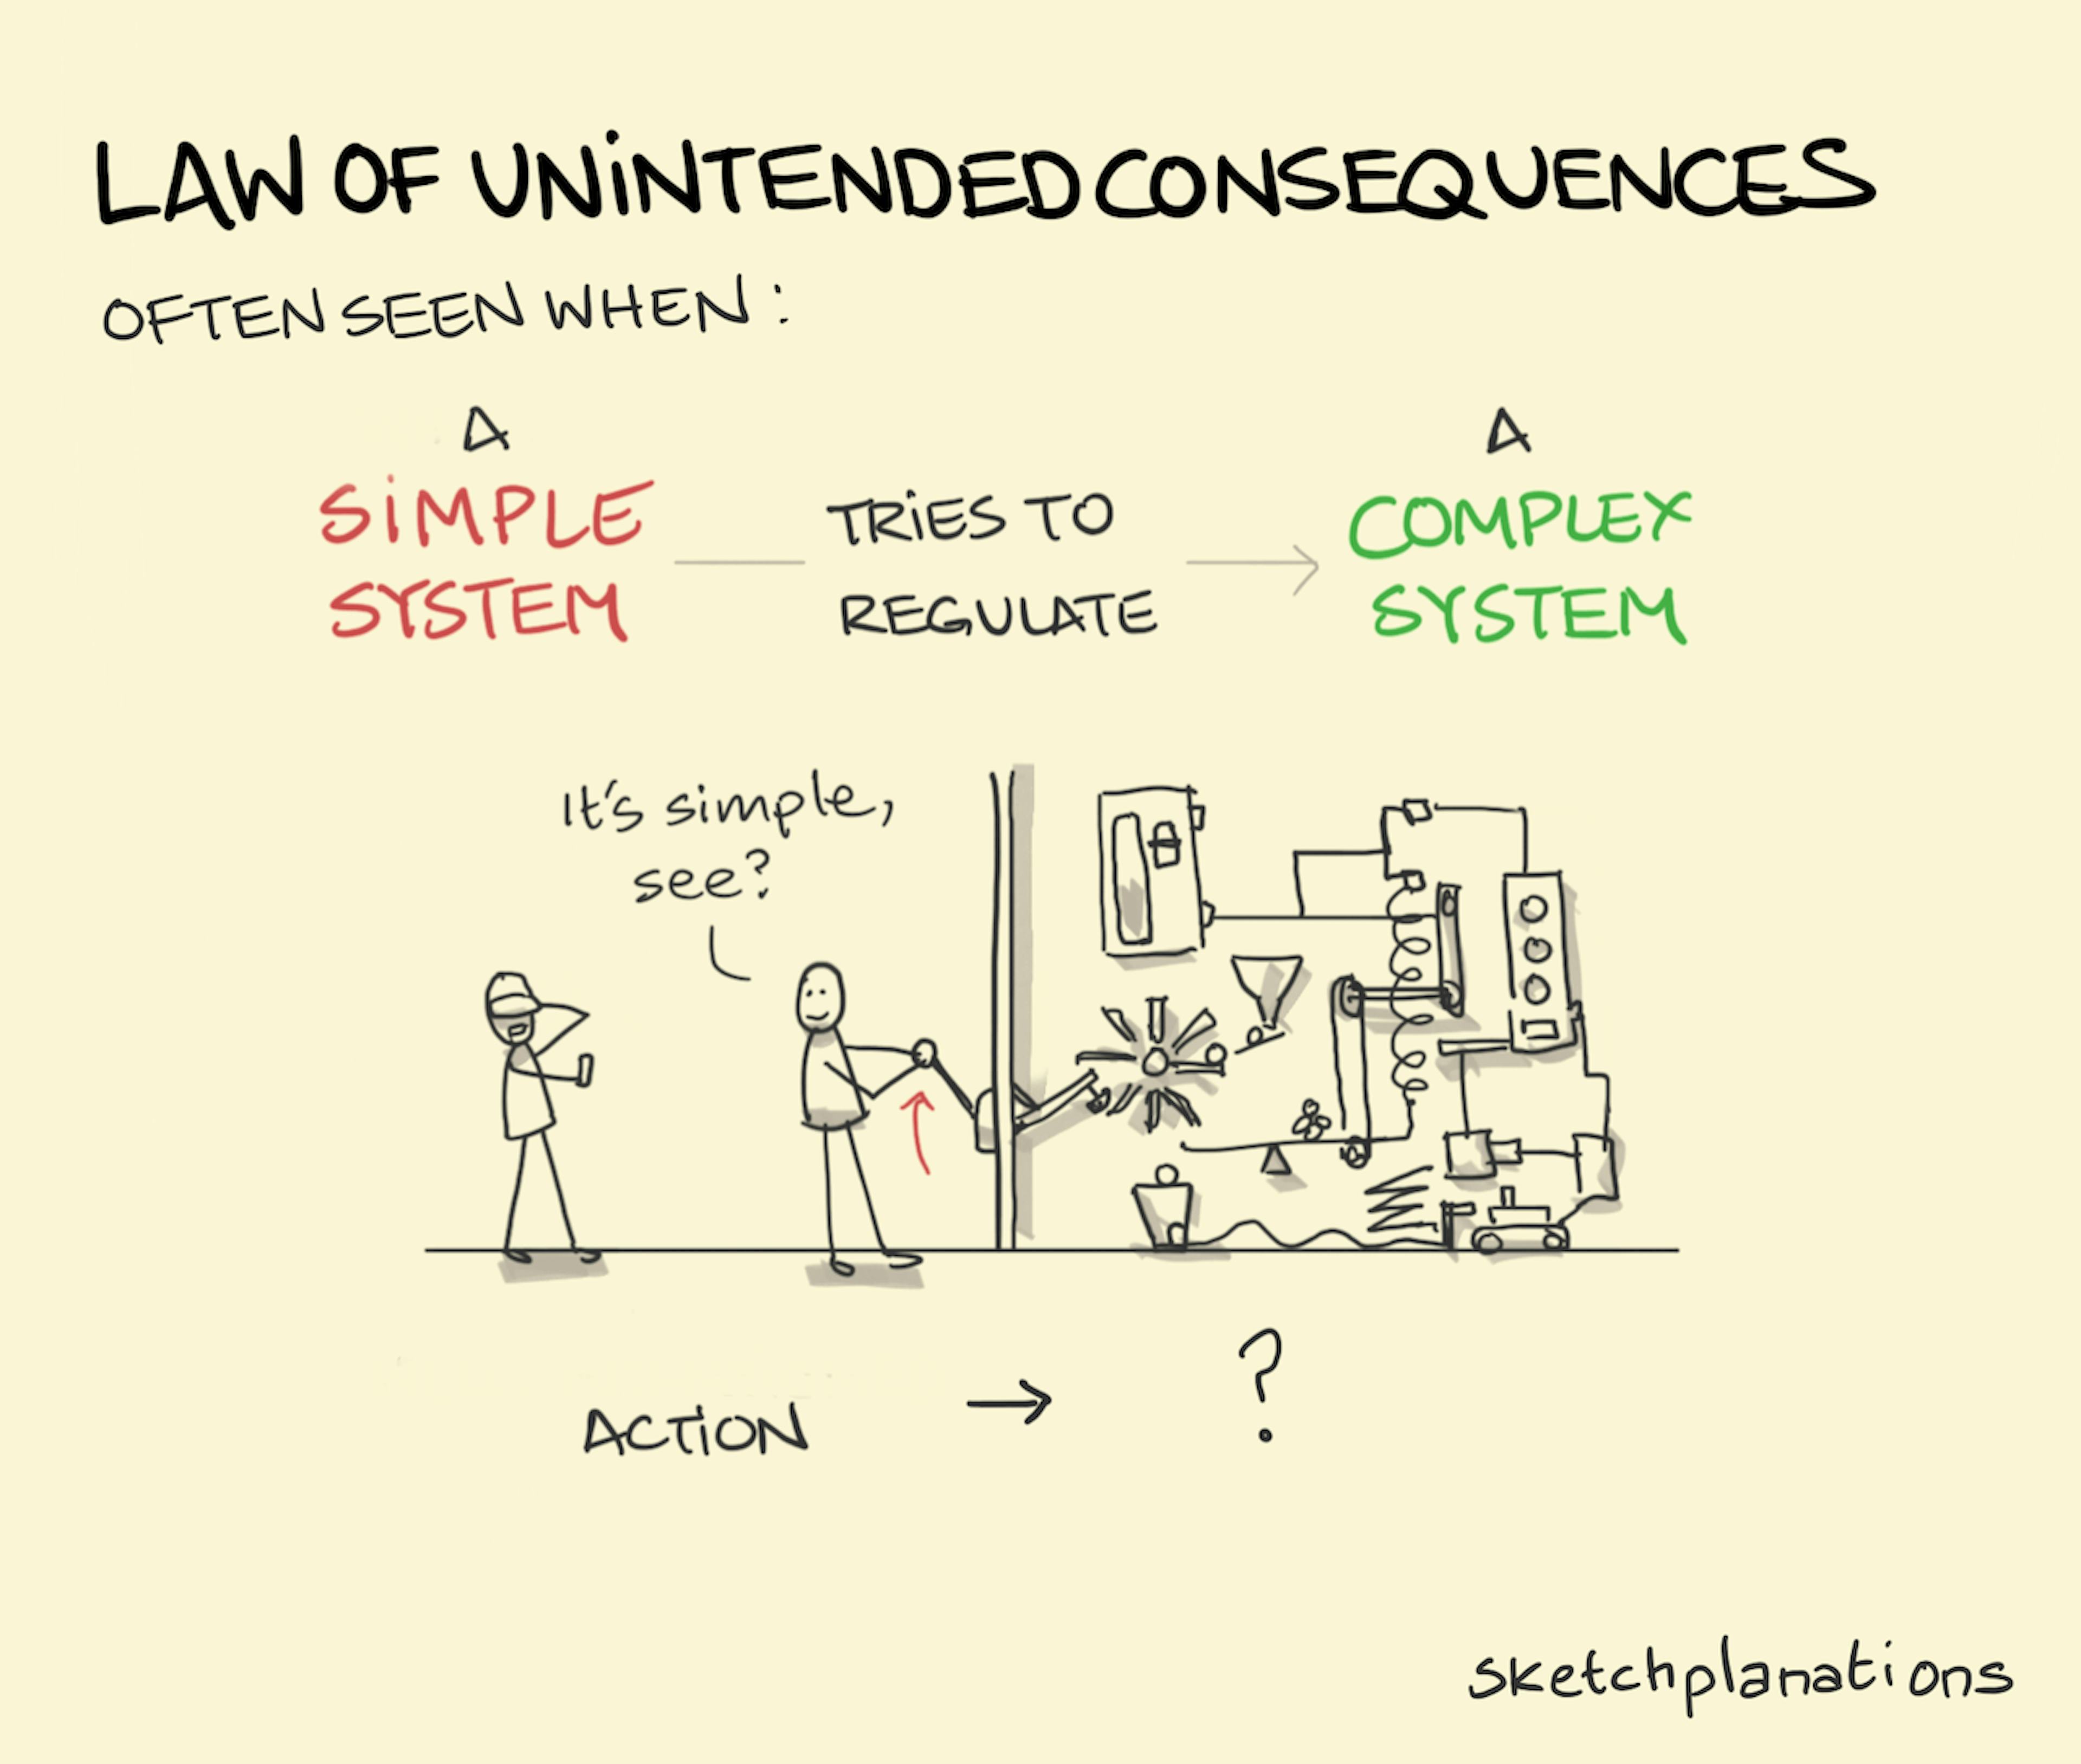 The law of unintended consequences illustration: with someone trying to regulate a complex system with a simple system